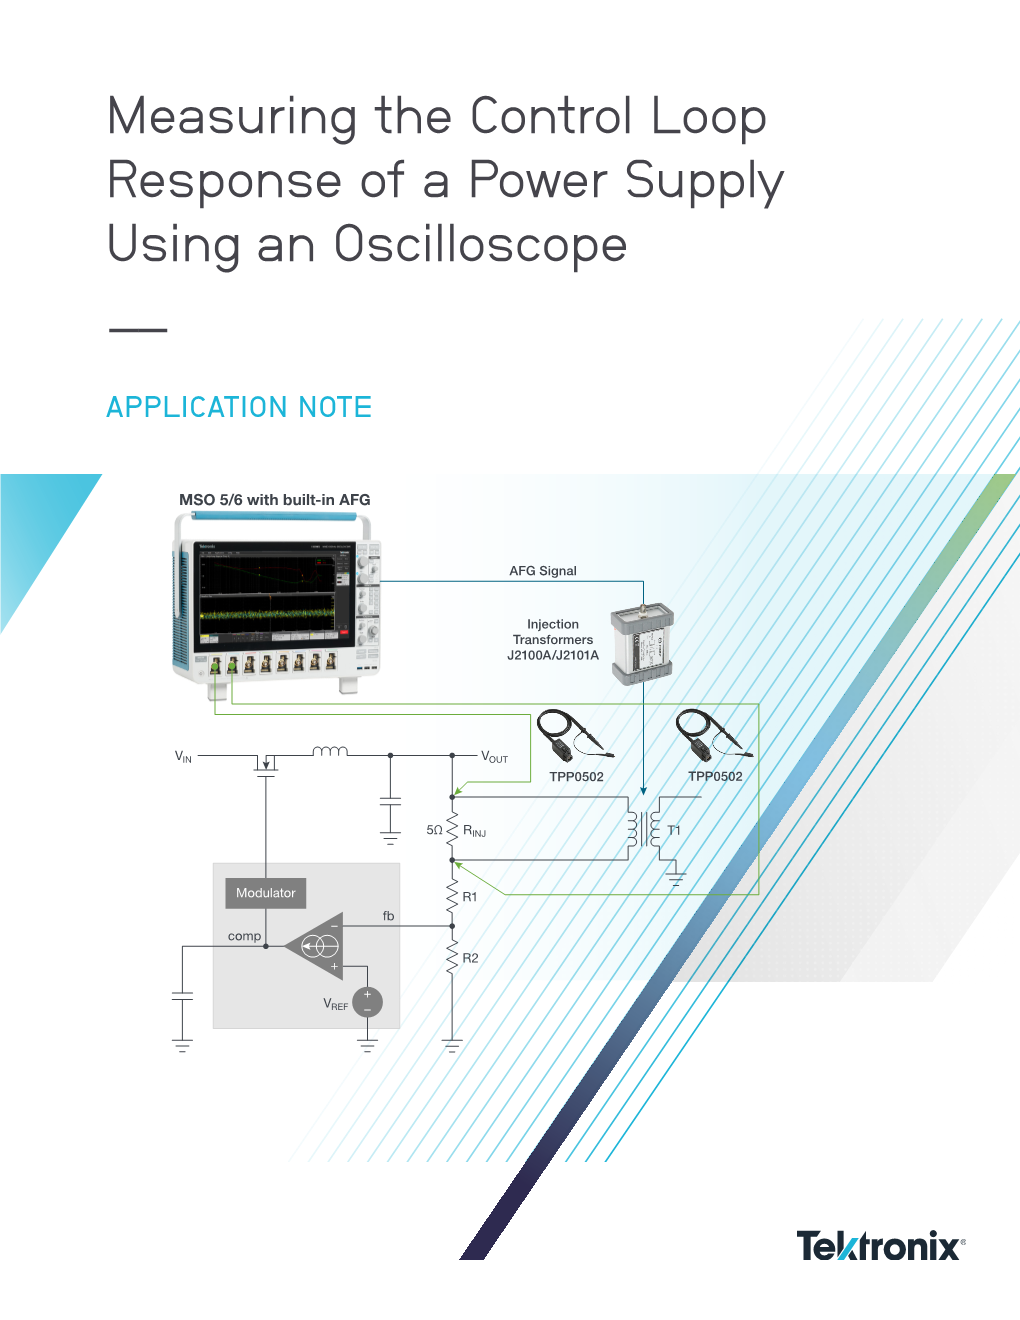 Measuring the Control Loop Response of a Power Supply Using an Oscilloscope ––